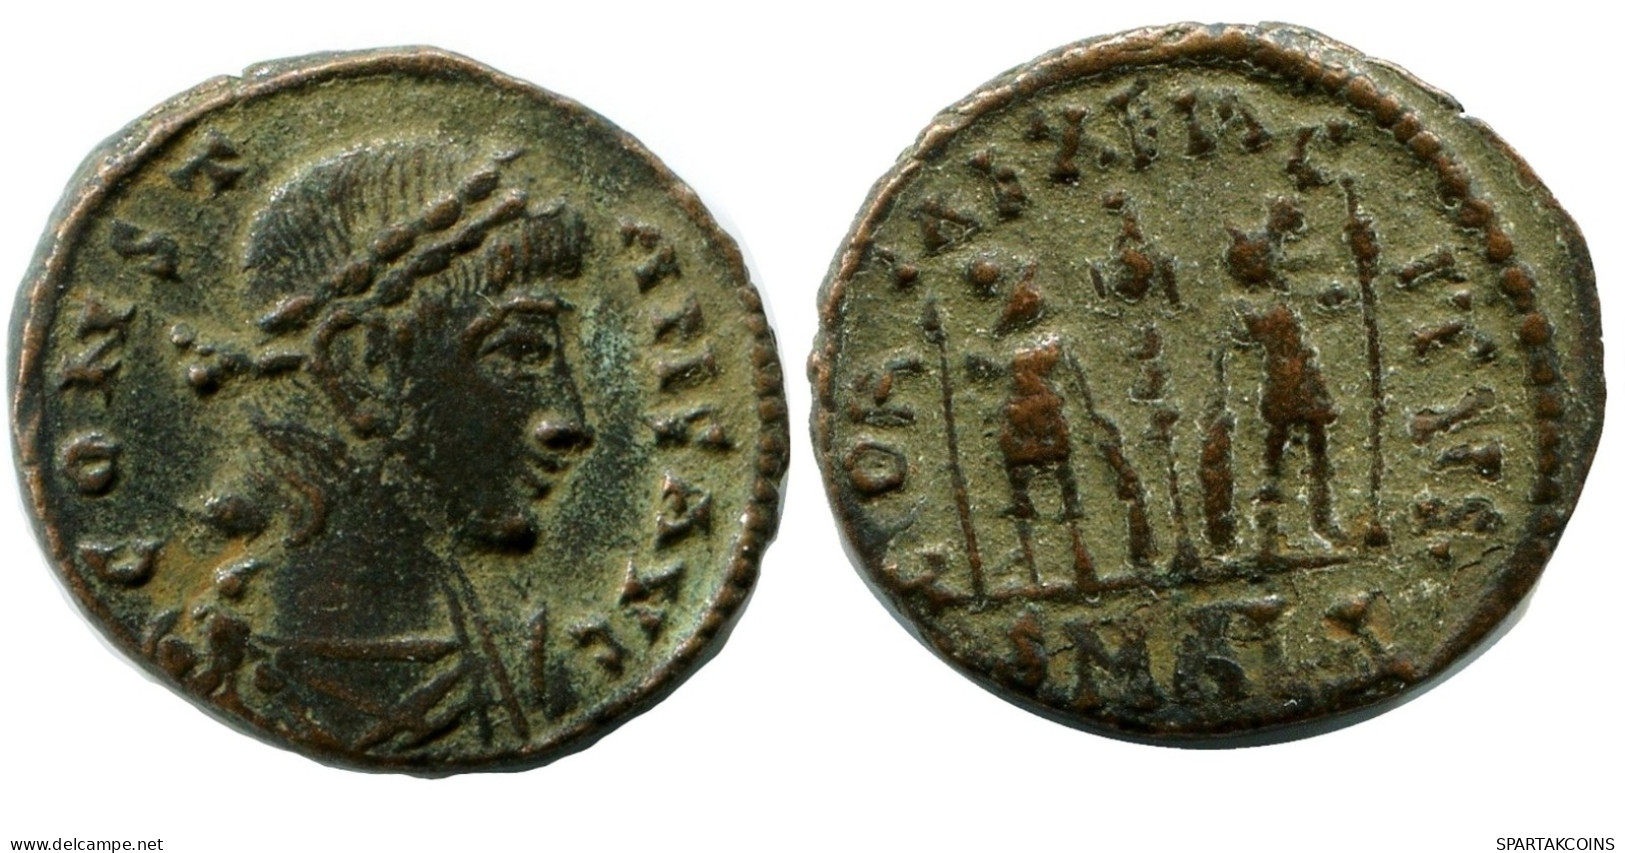 CONSTANS MINTED IN ALEKSANDRIA FROM THE ROYAL ONTARIO MUSEUM #ANC11359.14.U.A - Der Christlischen Kaiser (307 / 363)